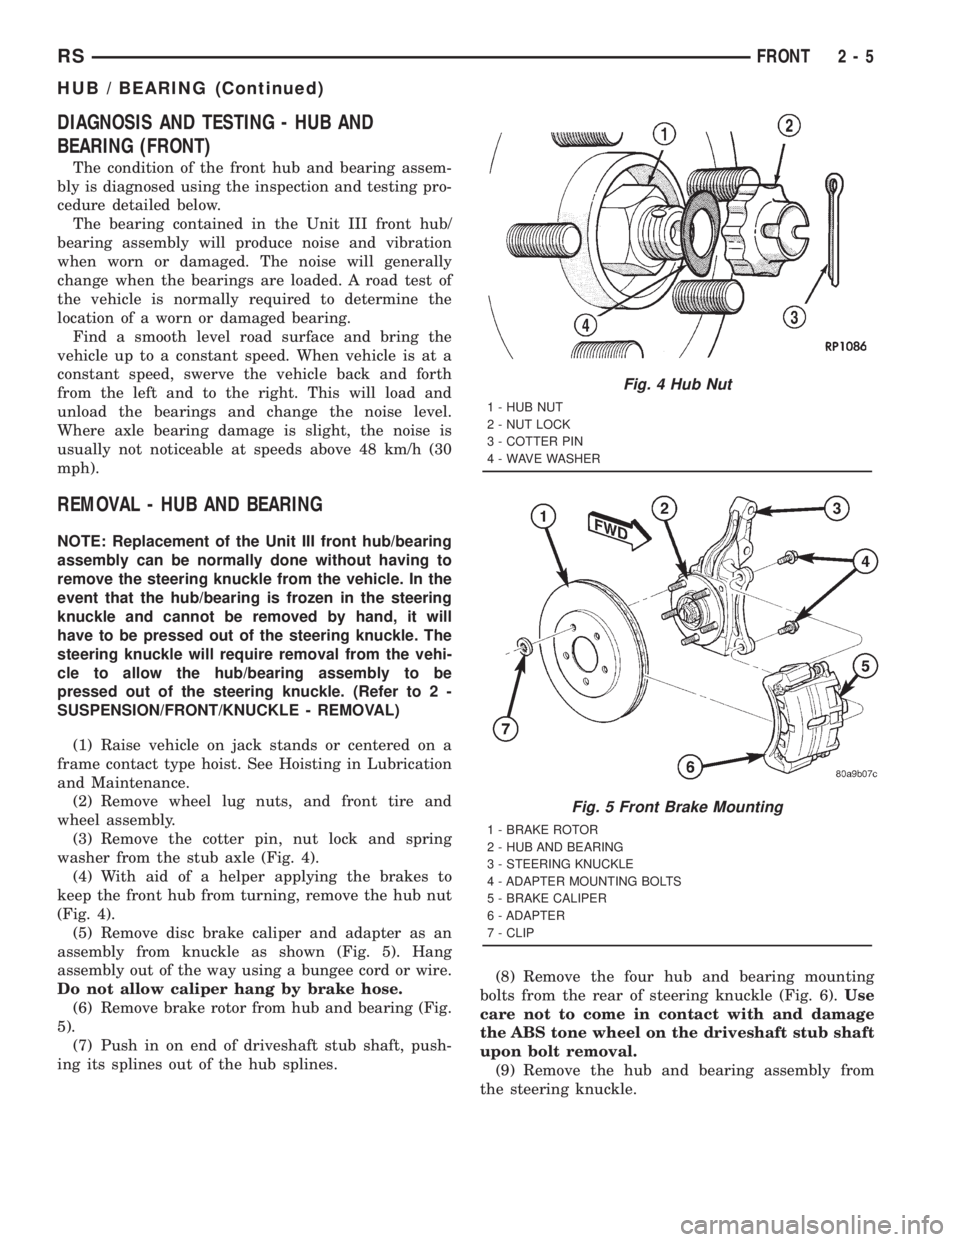 CHRYSLER VOYAGER 2001  Service Manual DIAGNOSIS AND TESTING - HUB AND
BEARING (FRONT)
The condition of the front hub and bearing assem-
bly is diagnosed using the inspection and testing pro-
cedure detailed below.
The bearing contained in